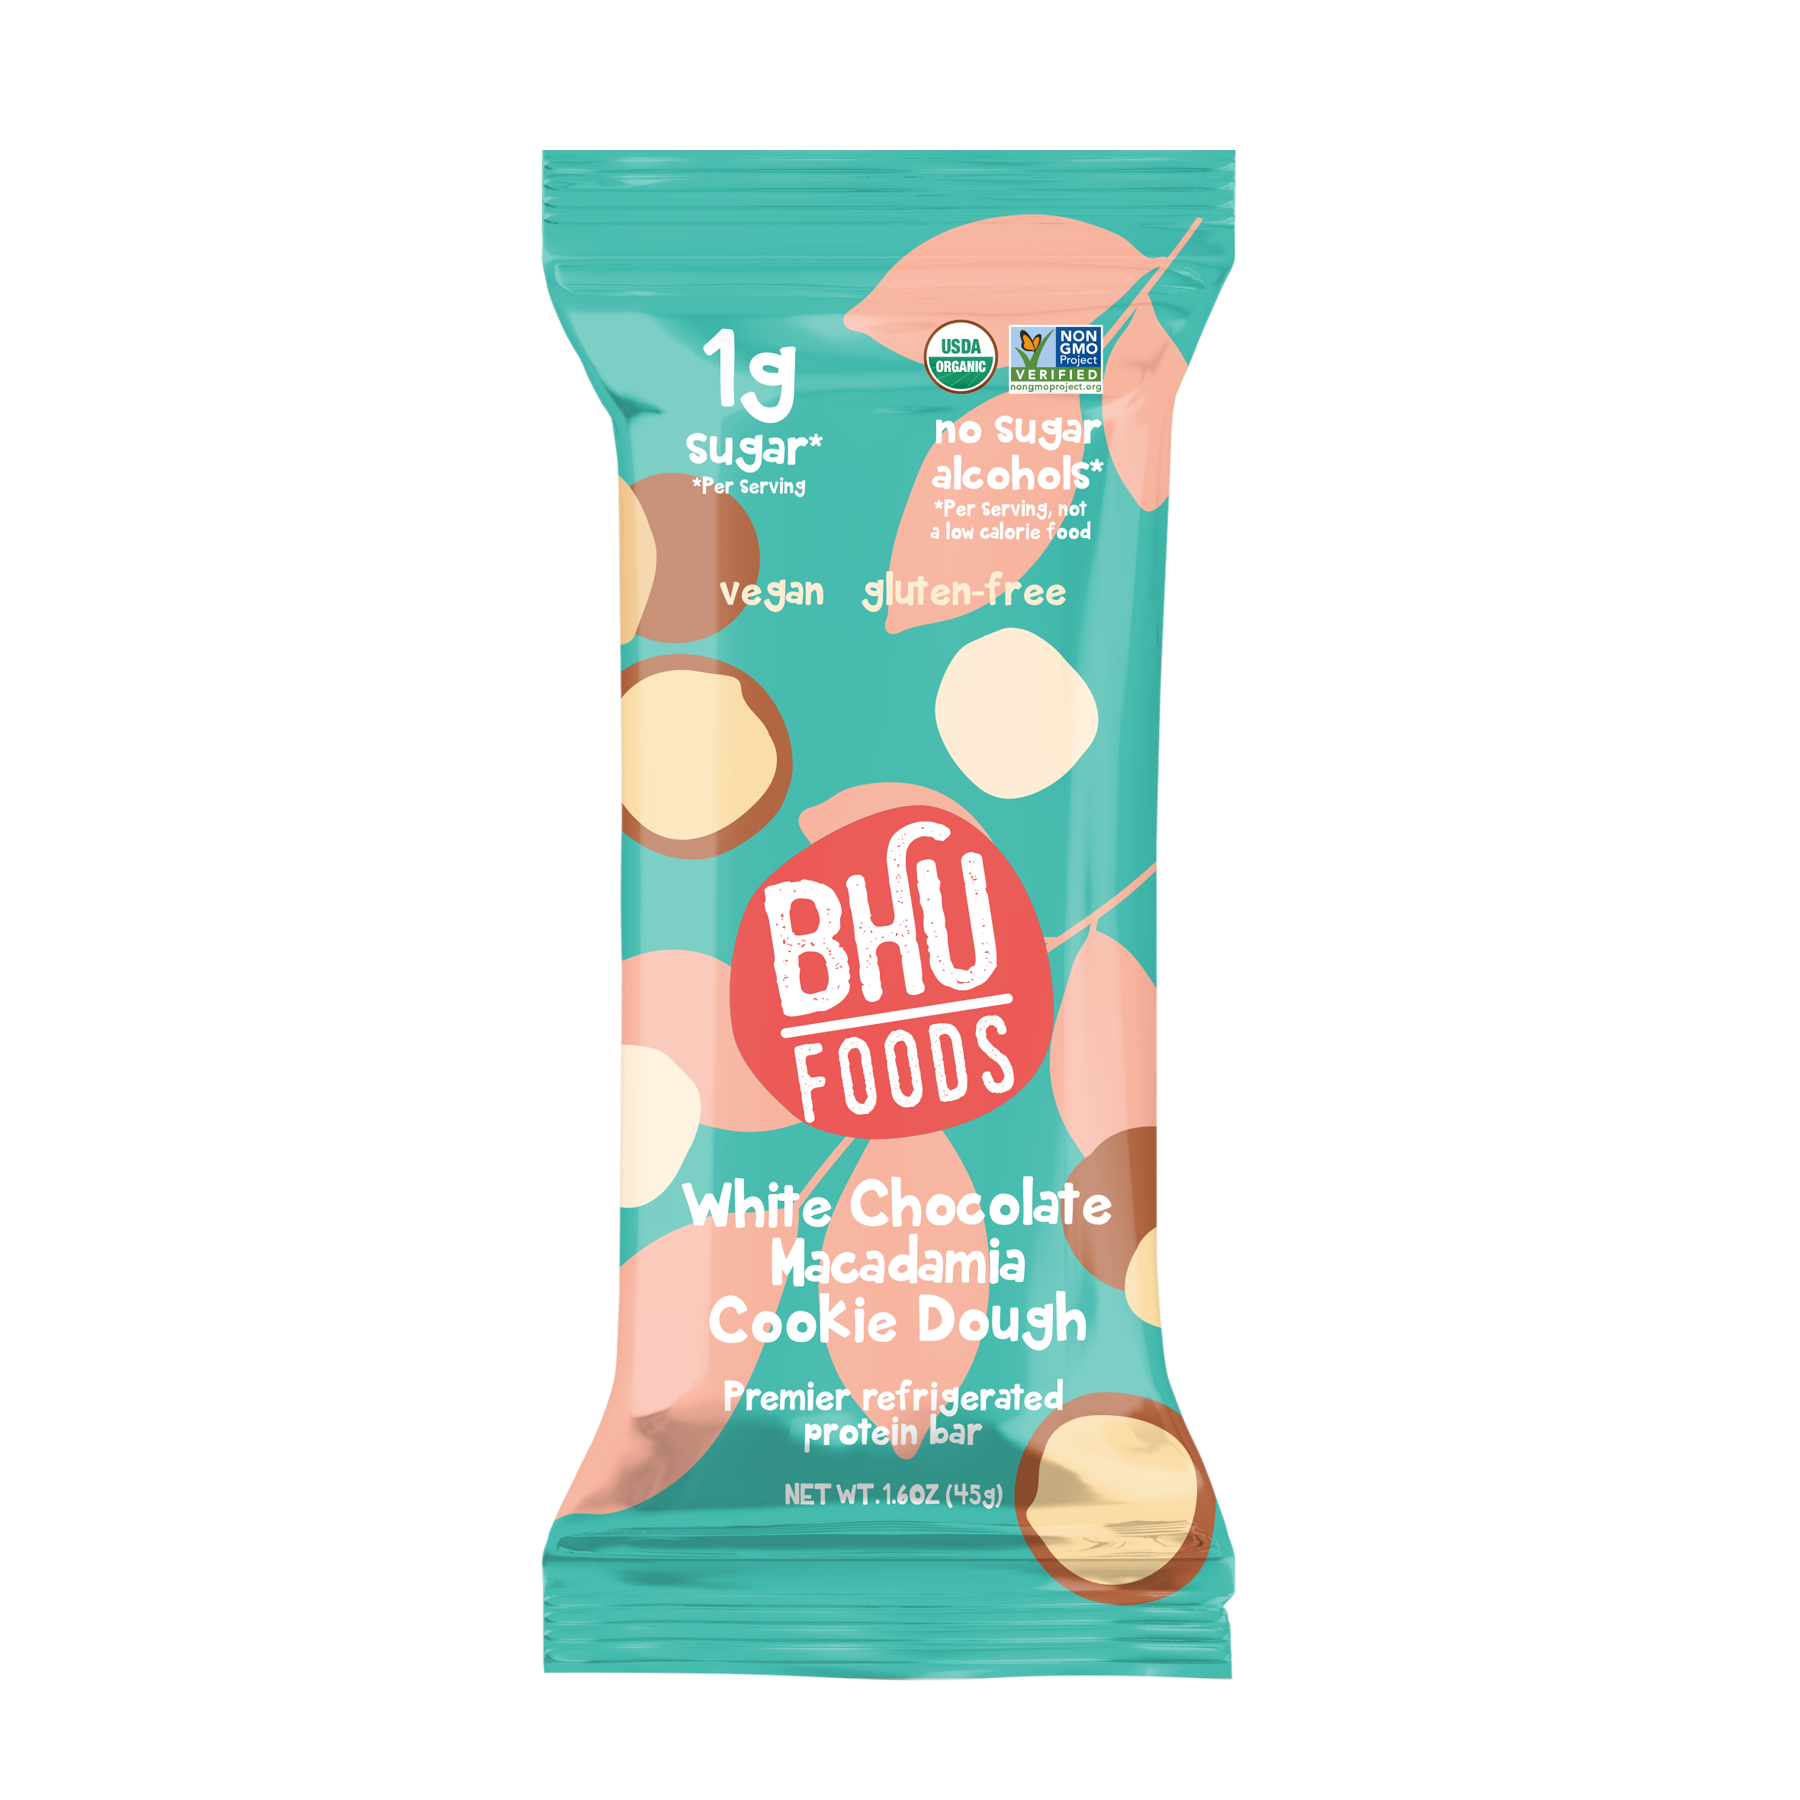 BHU Foods Premier Refrigerated Protein Bar - White Chocolate Macadamia Cookie Dough 12 innerpacks per case 12.8 oz